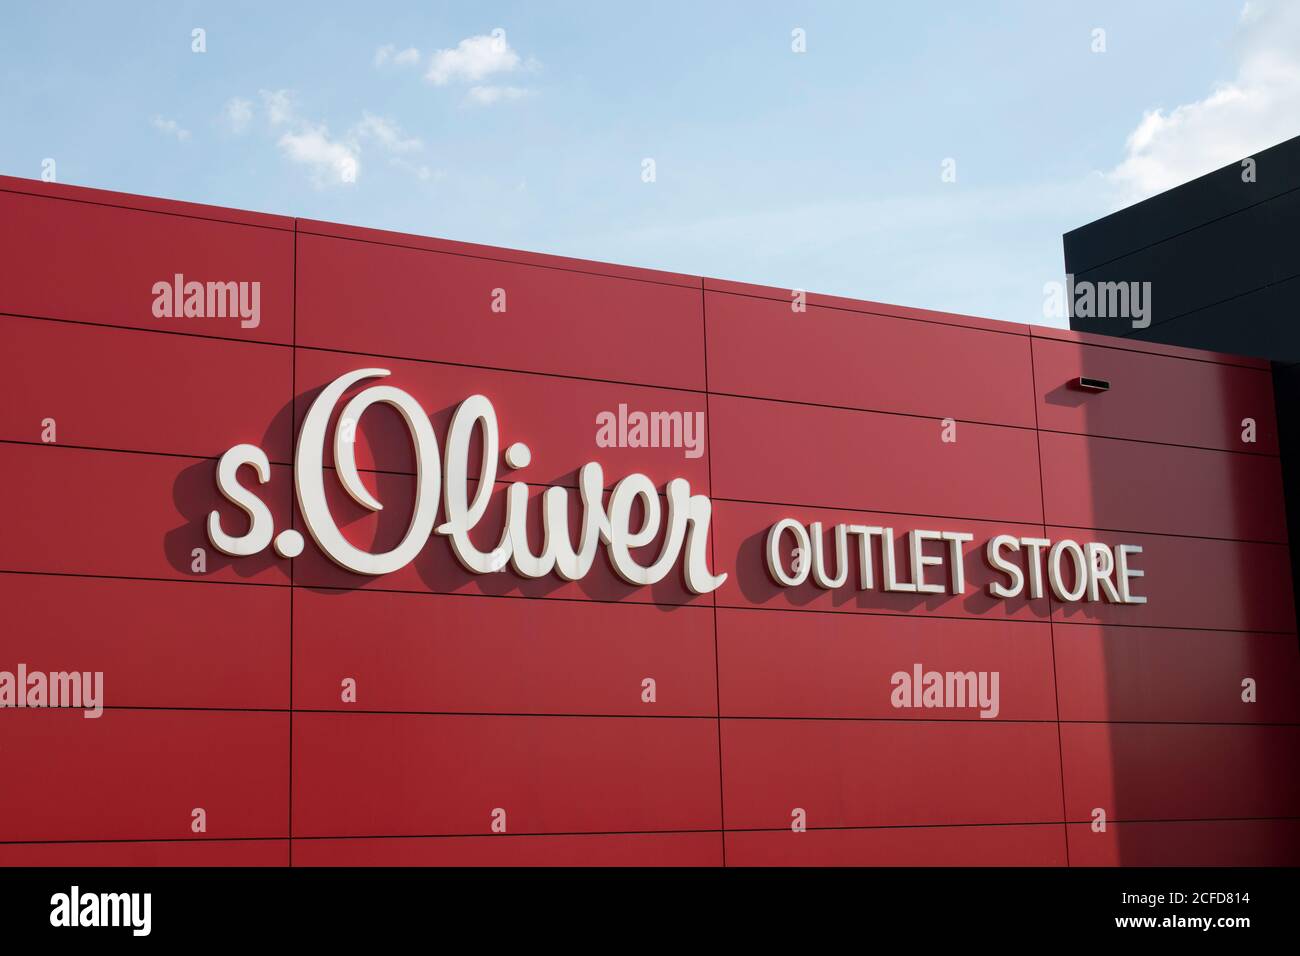 Centro outlet a Rottendorf vicino a Würzburg, comma, - s.Oliver Foto stock  - Alamy